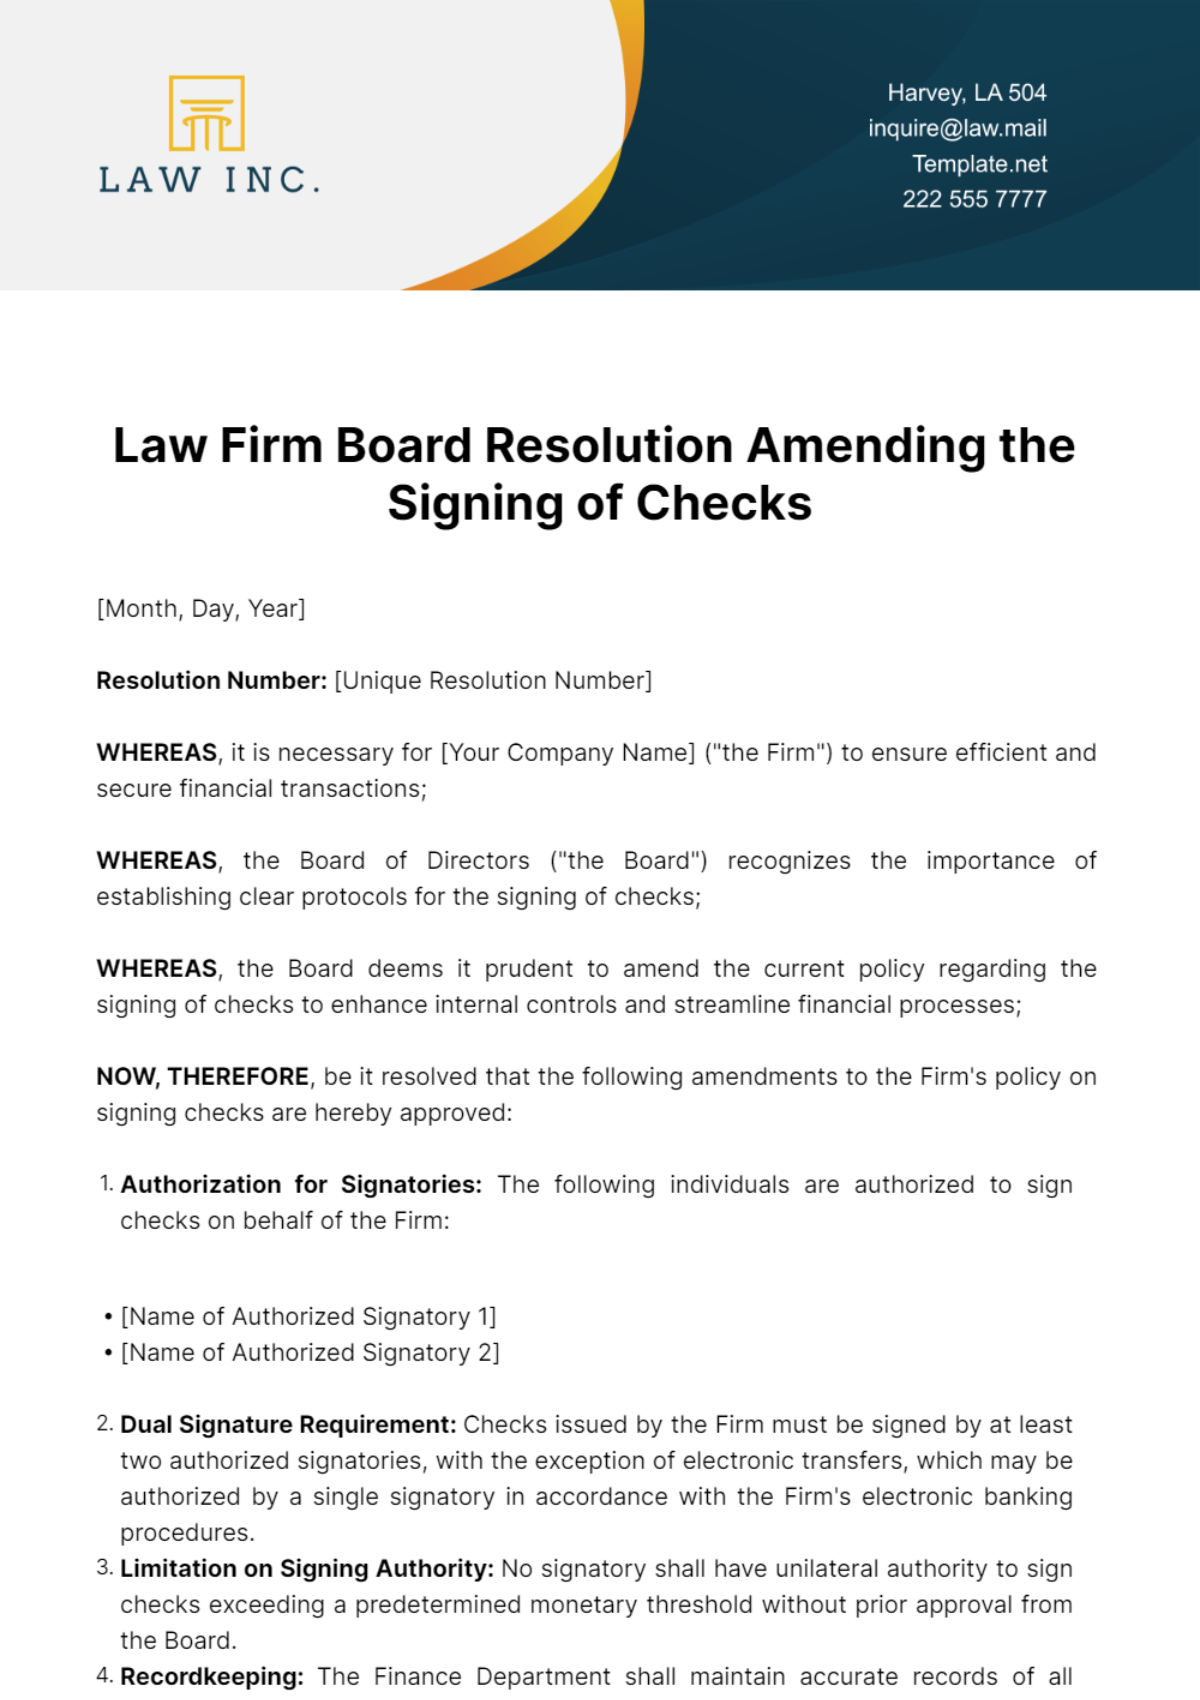 Law Firm Board Resolution Amending the Signing of Checks Template